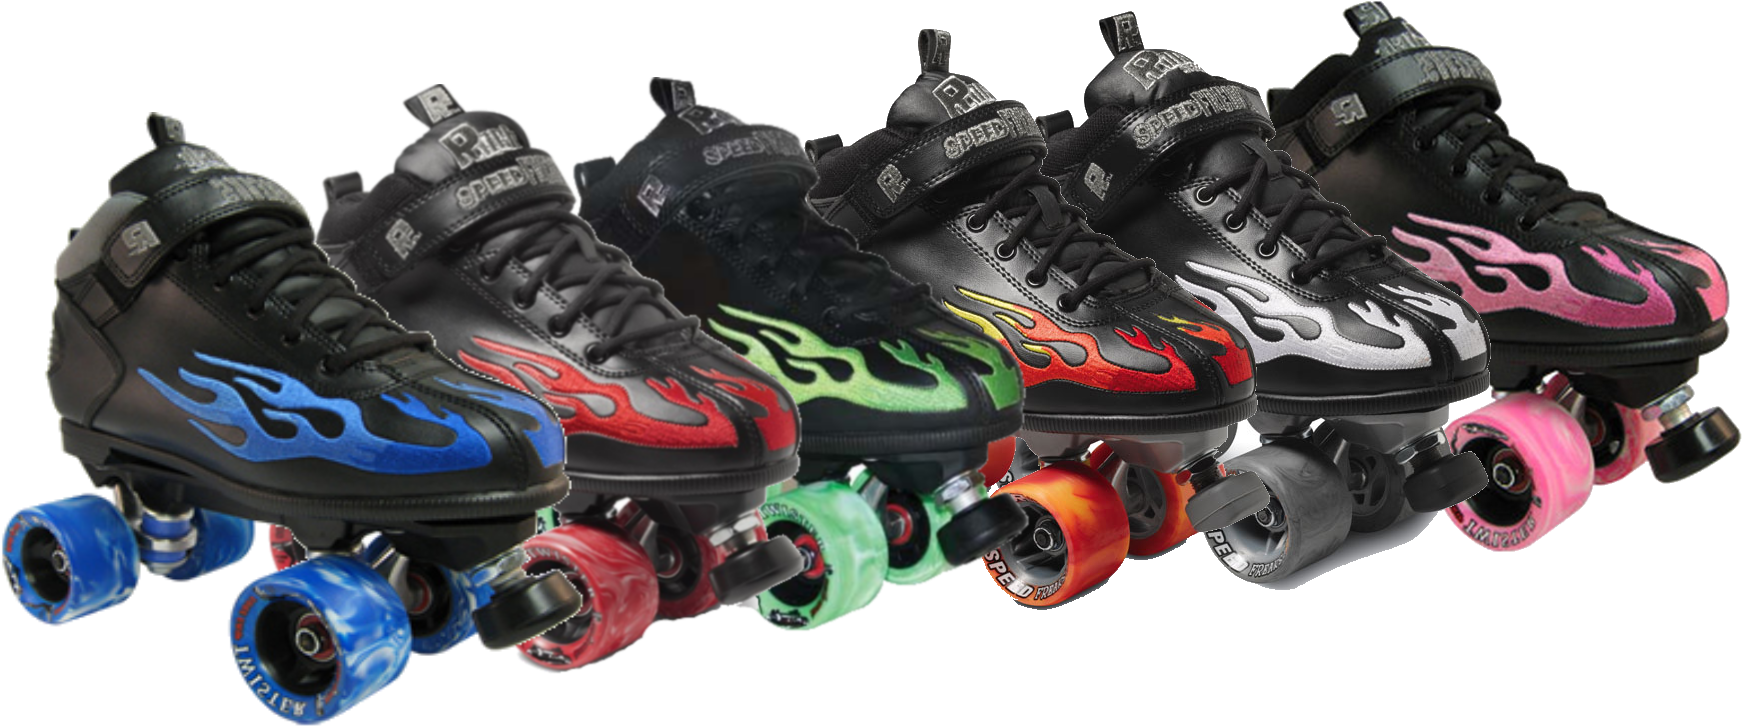 Colorful Inline Skates Array